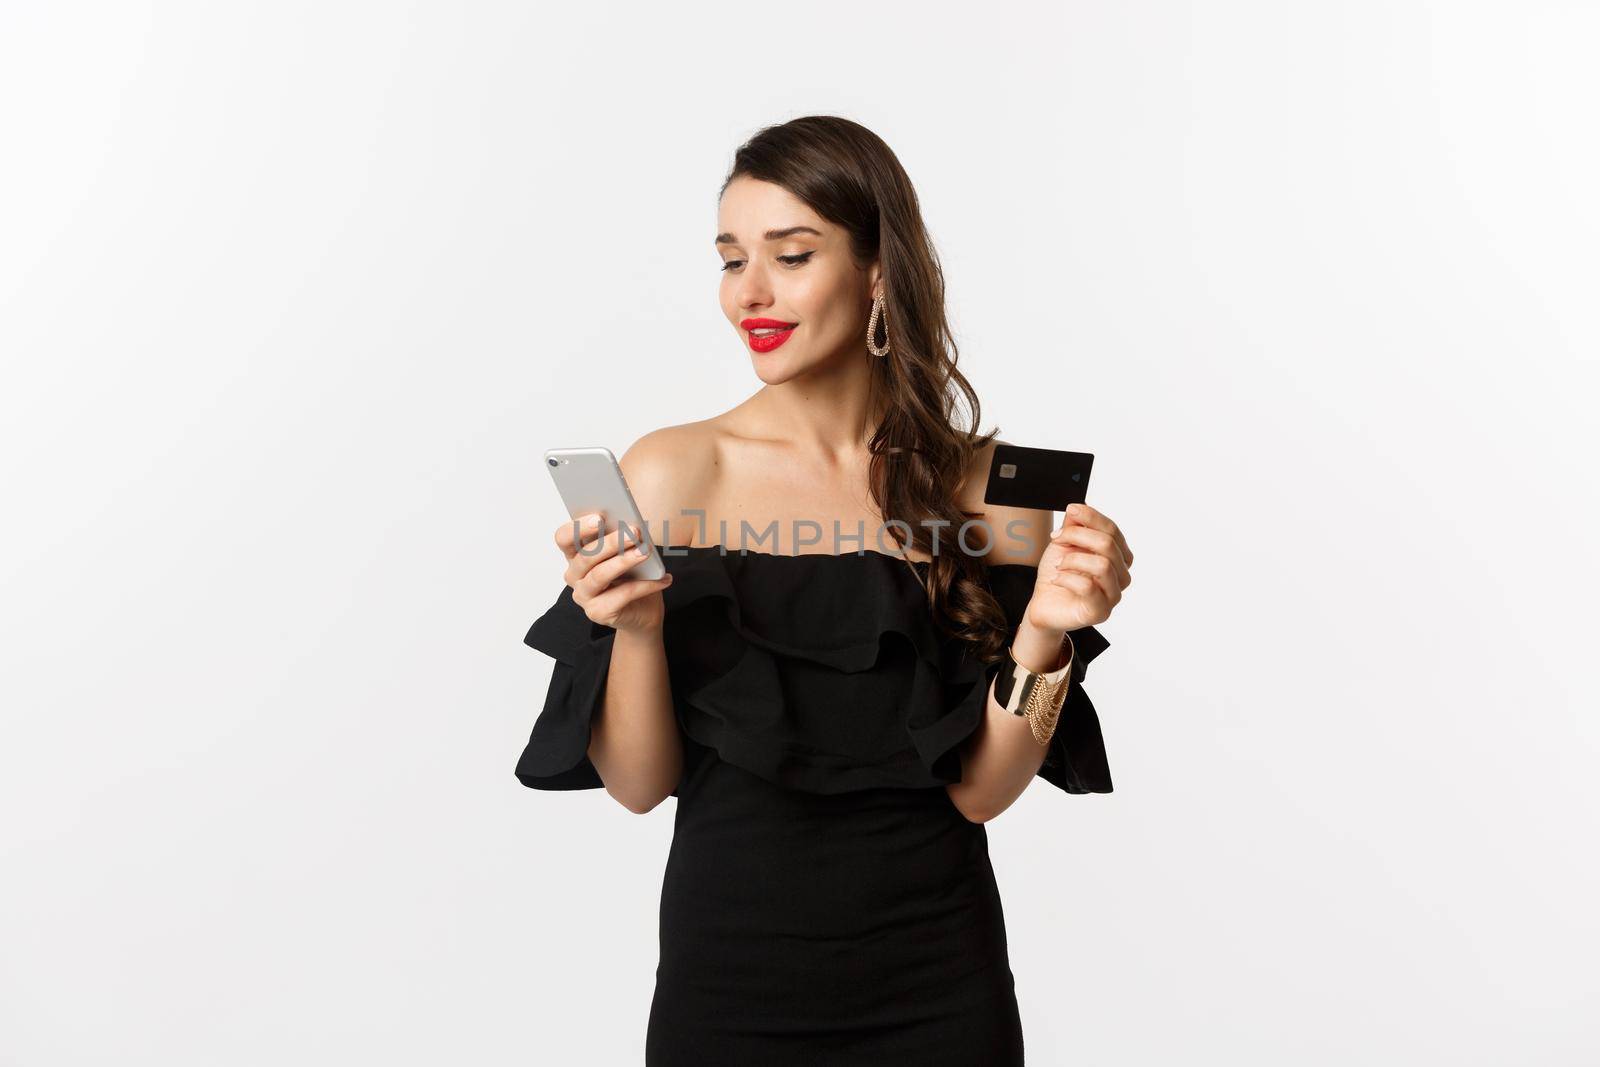 Fashion and shopping concept. Young attractive woman making purchase online, buying in internet with credit card and smartphone, white background.